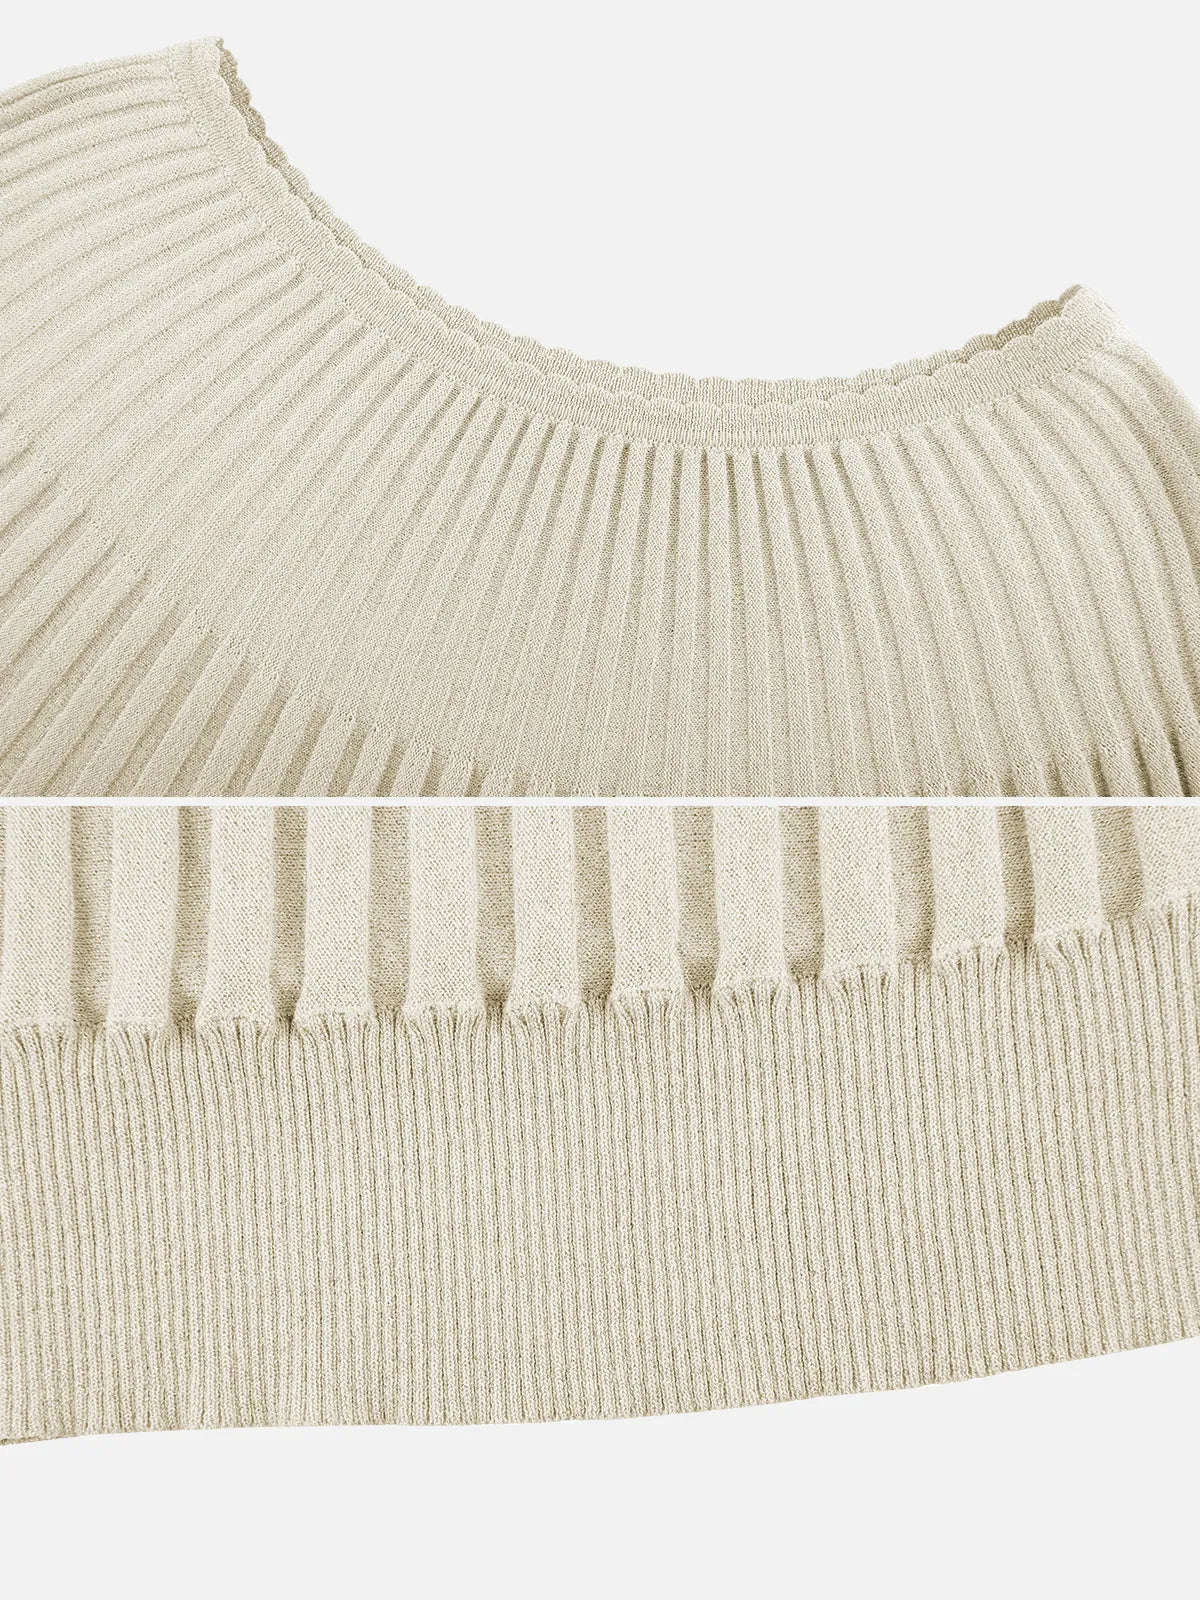 Casual fall style: The casual charm of the batwing knit sweater.